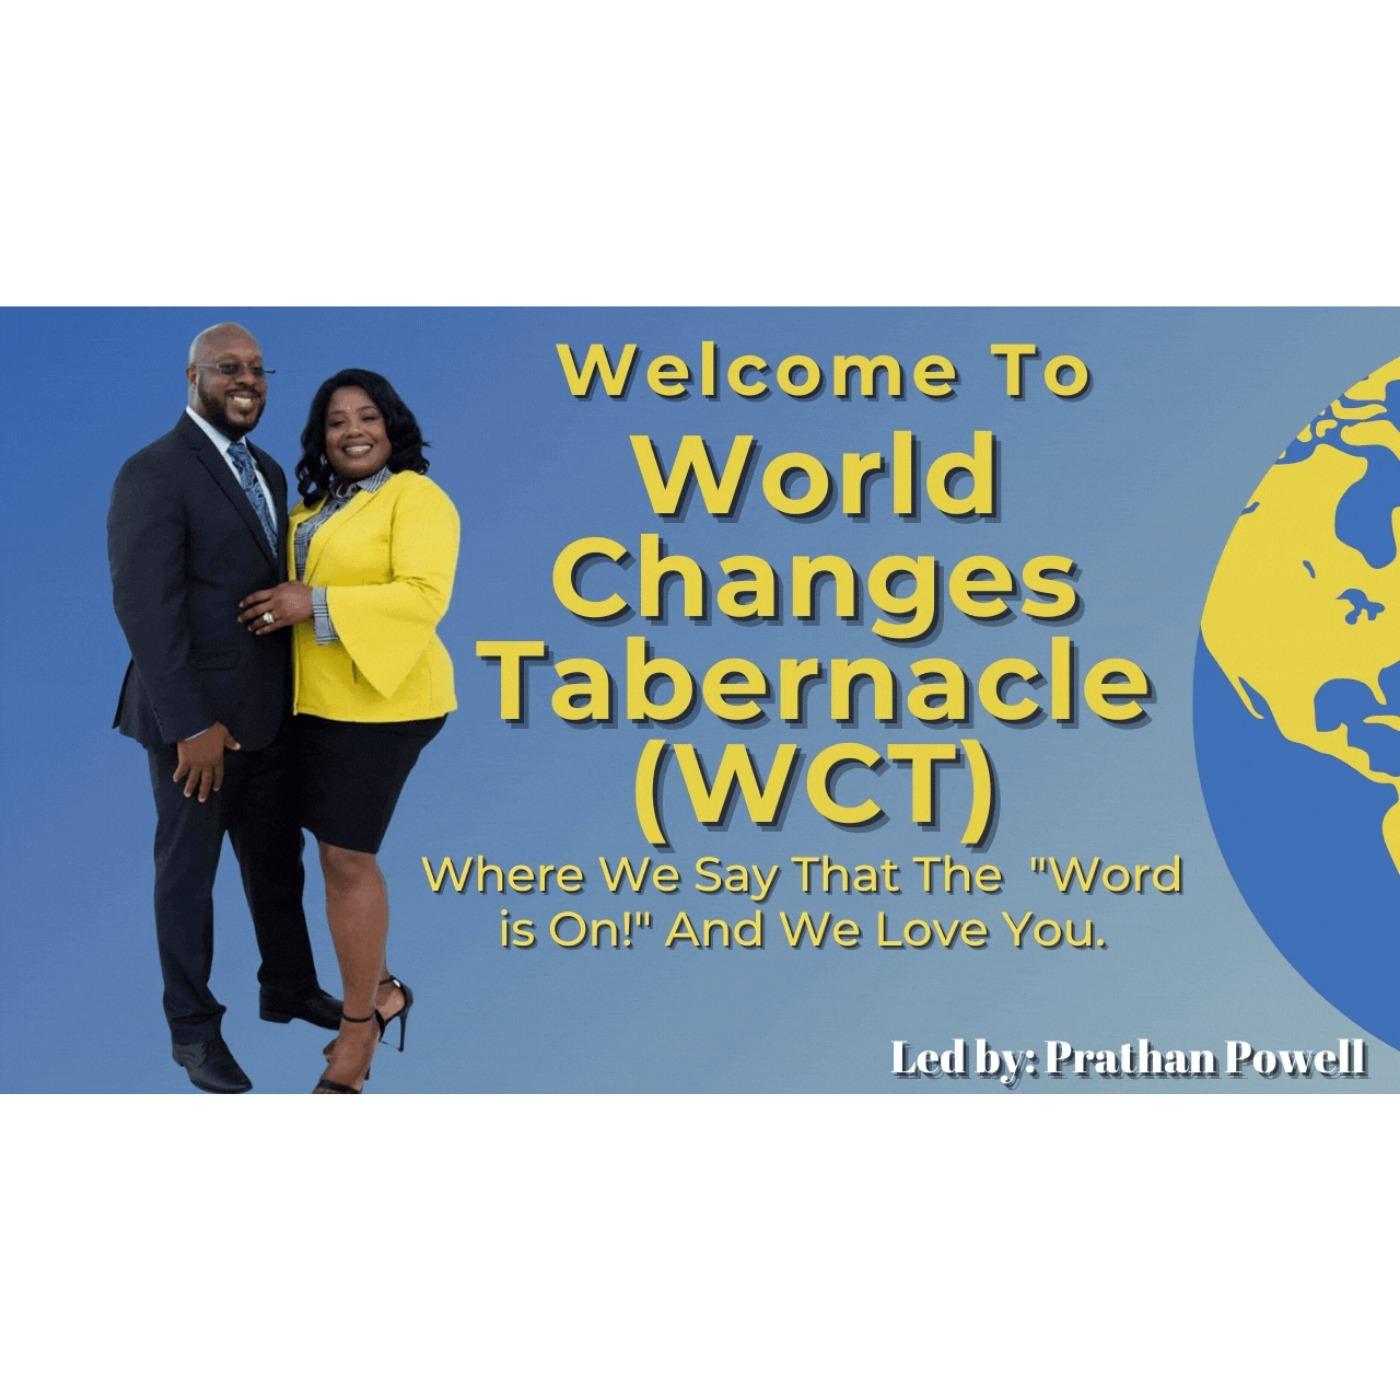 World Changes Tabernacle (WCT)